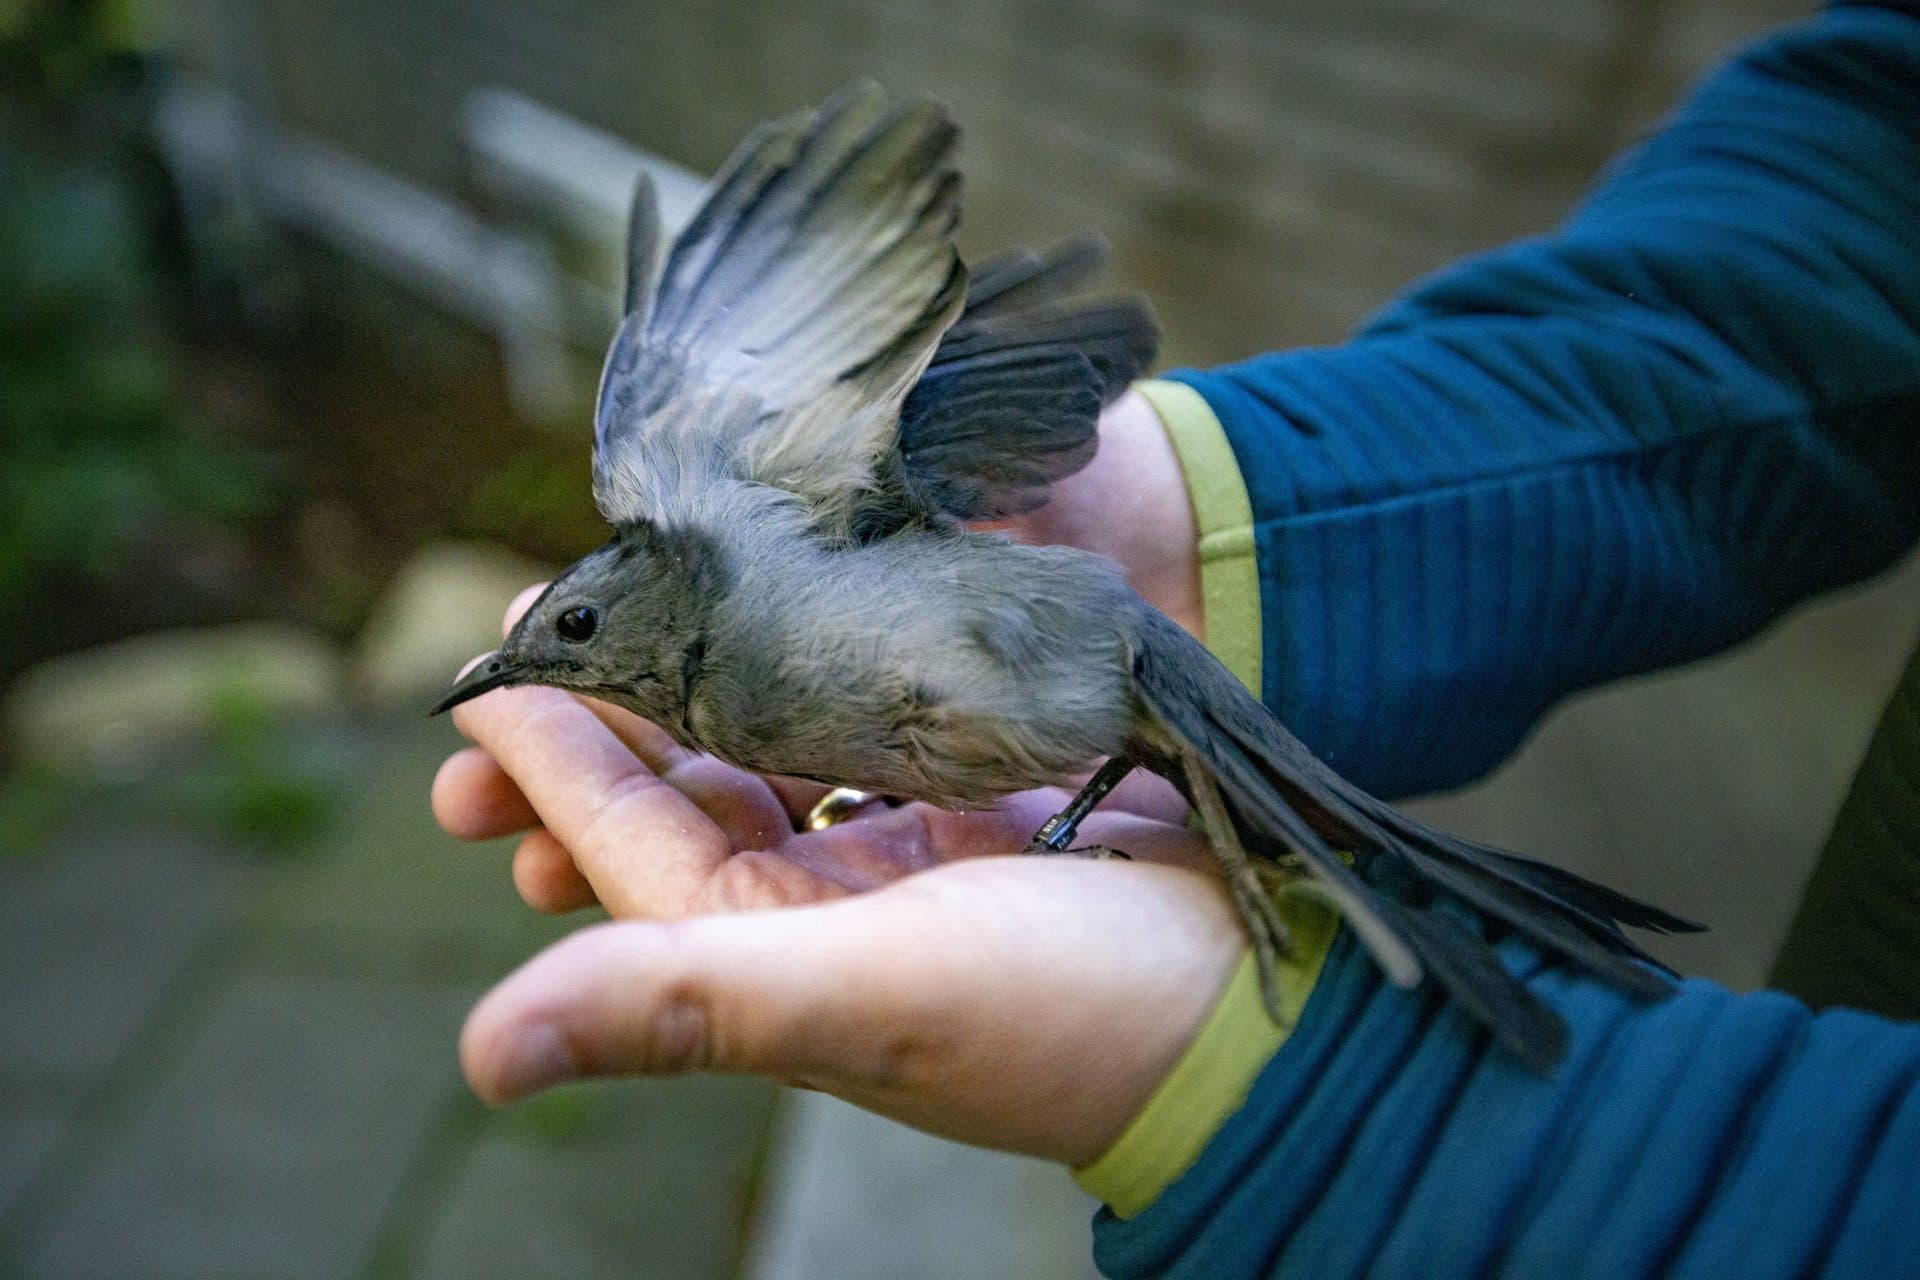 Manomet Direcror Evan Dalton releases a catbird after it’s been banded and given an exam. (Jesse Costa/WBUR)